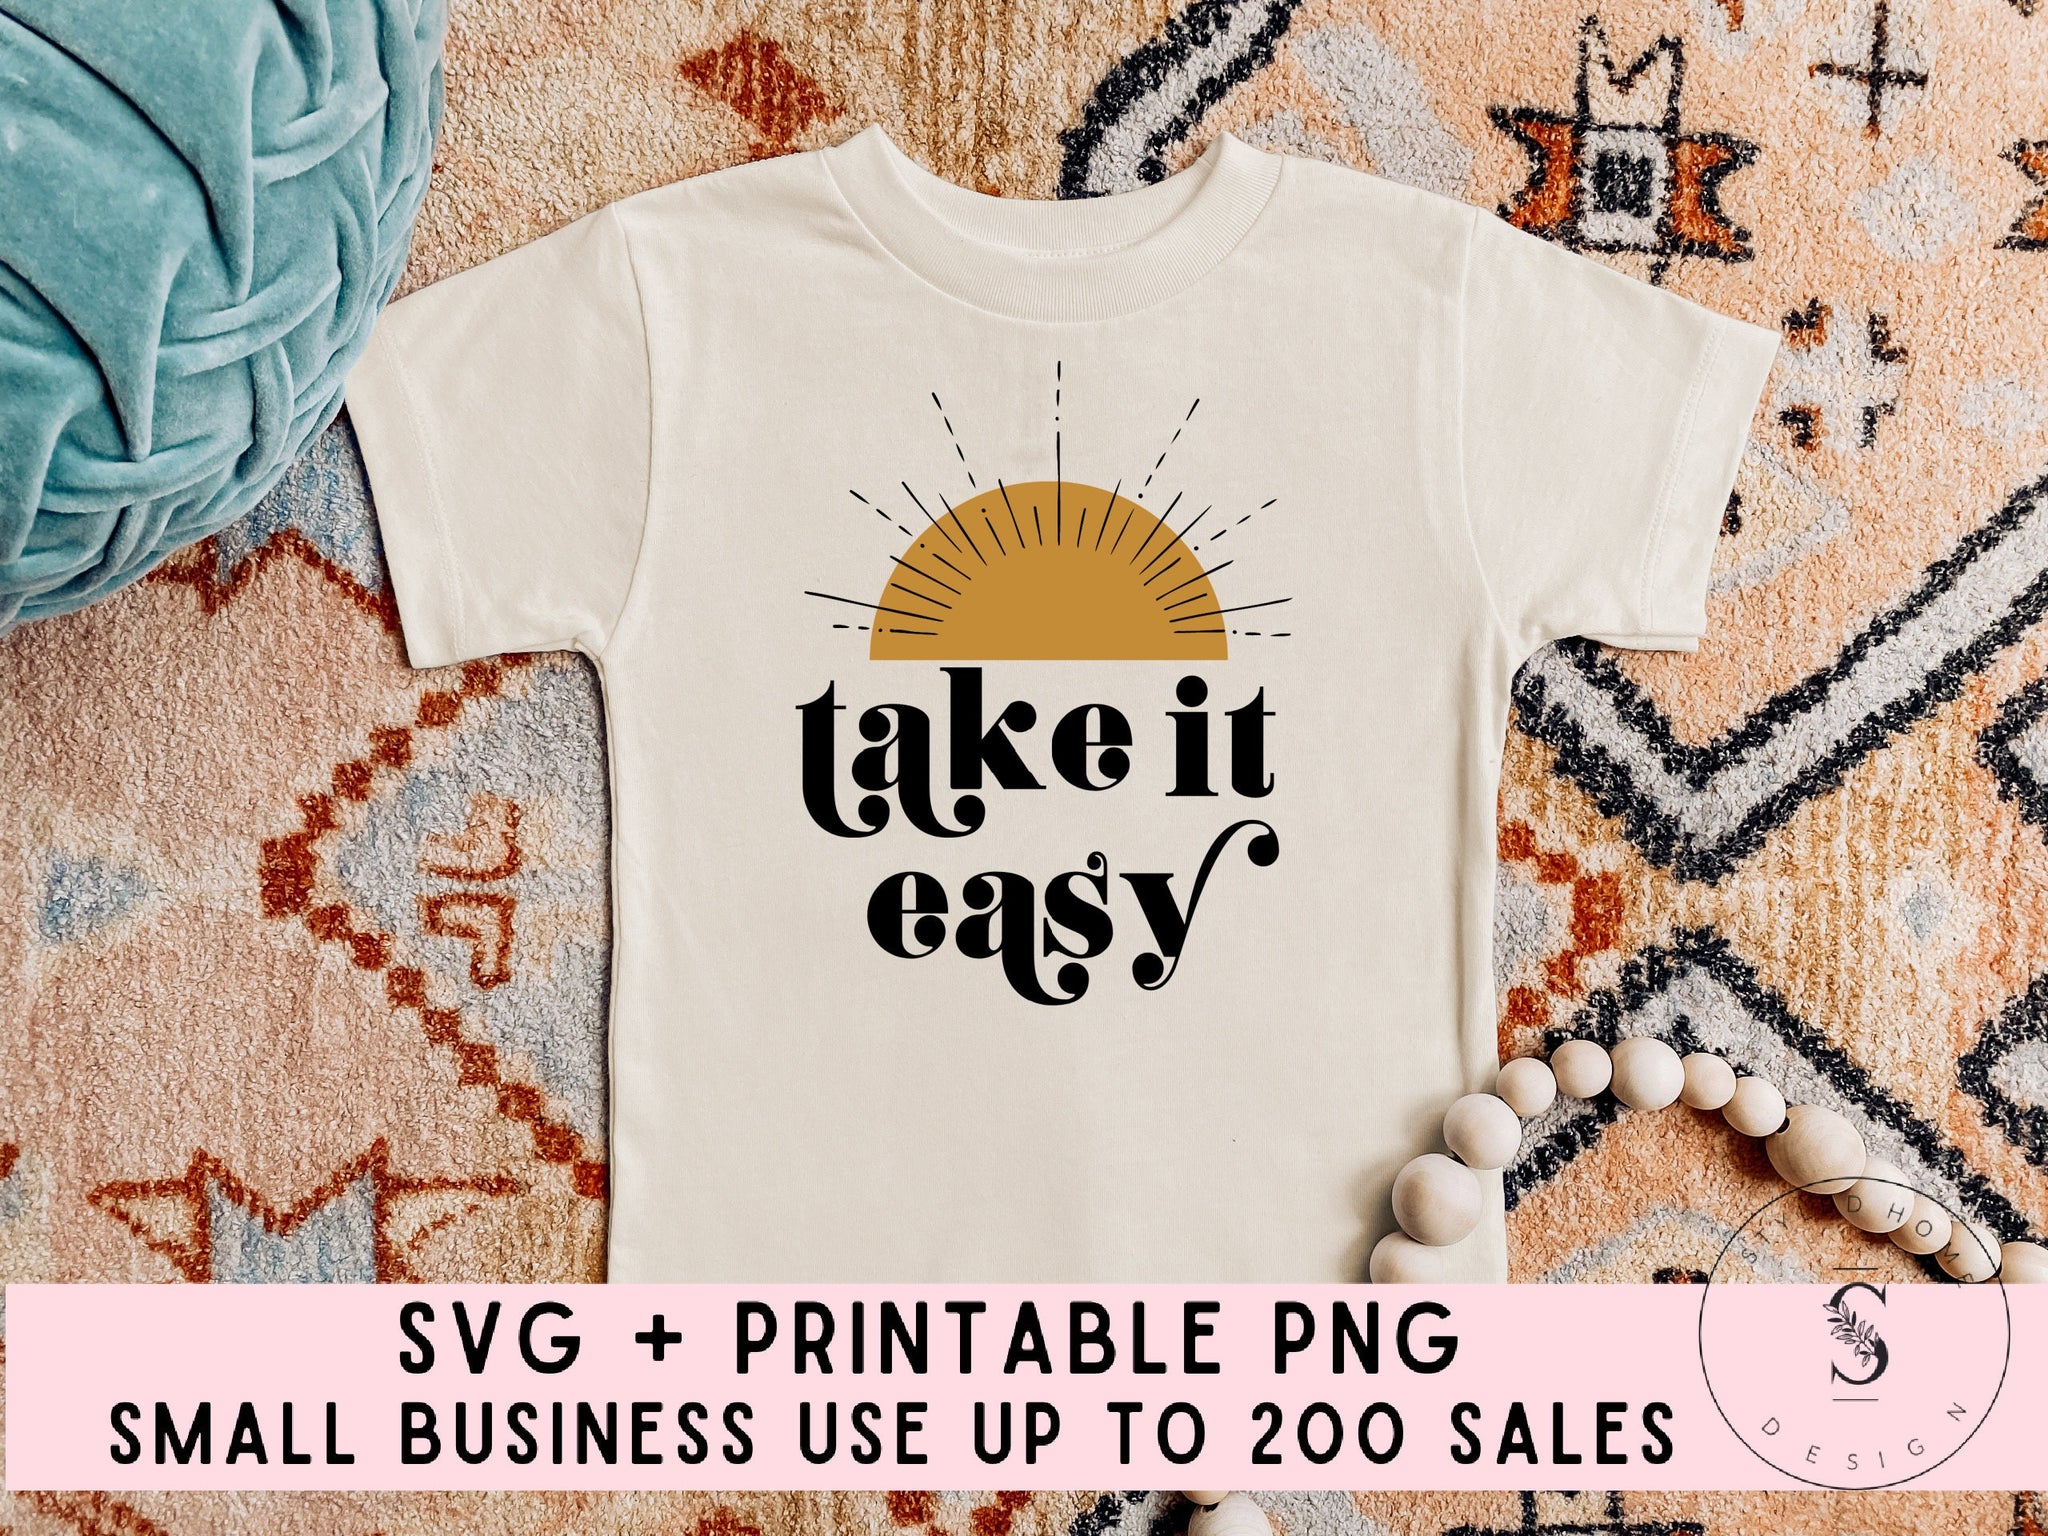 Take it Easy, Sunny Days Ahead, Summer Boho Vintage Spring, Retro SVG Cut File DXF Printable PNG Silhouette CricutSublimation